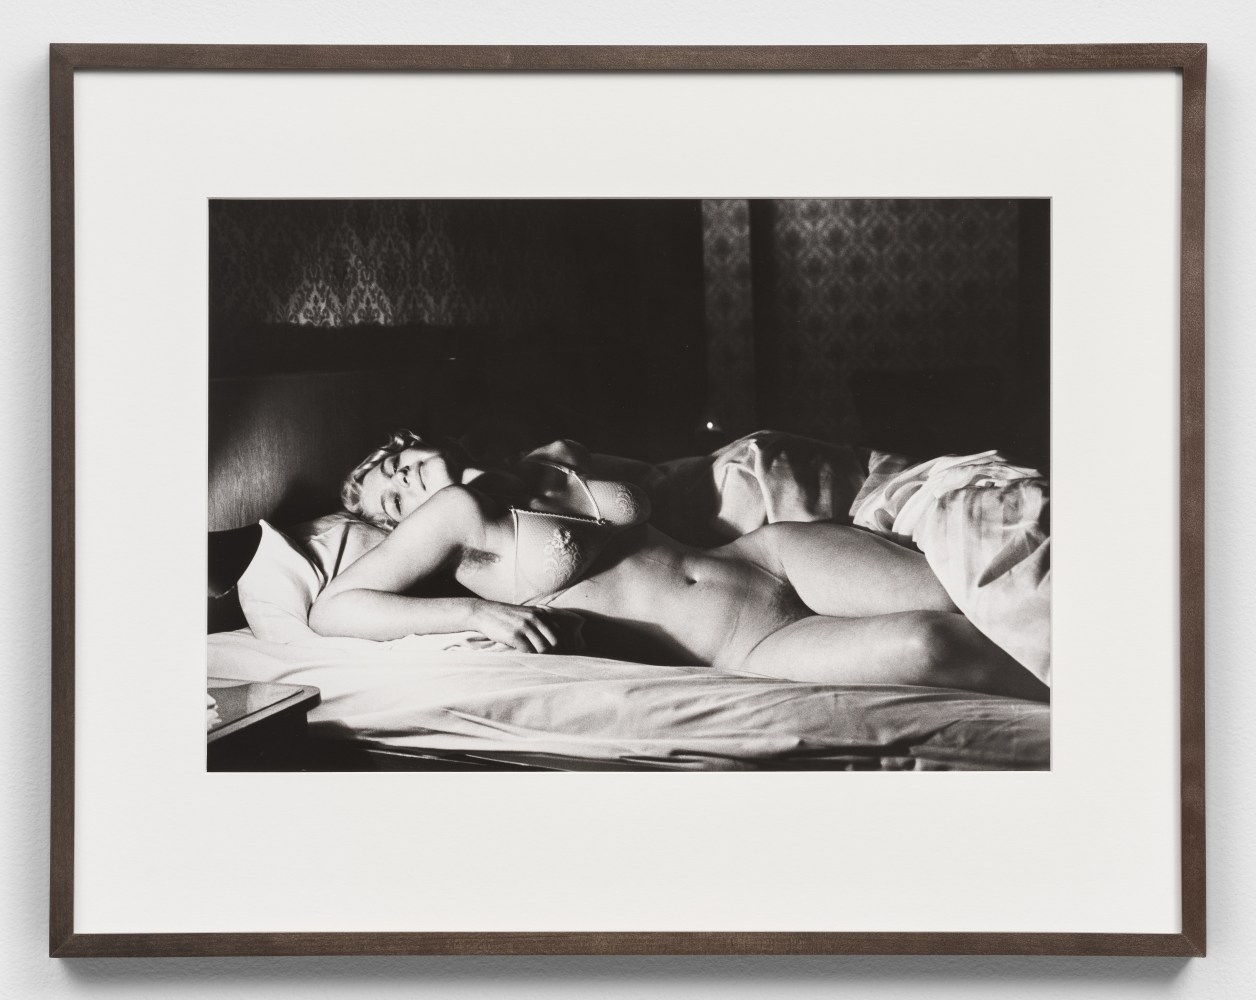 Black and white photographic print by Helmut Newton of a nude woman in bed